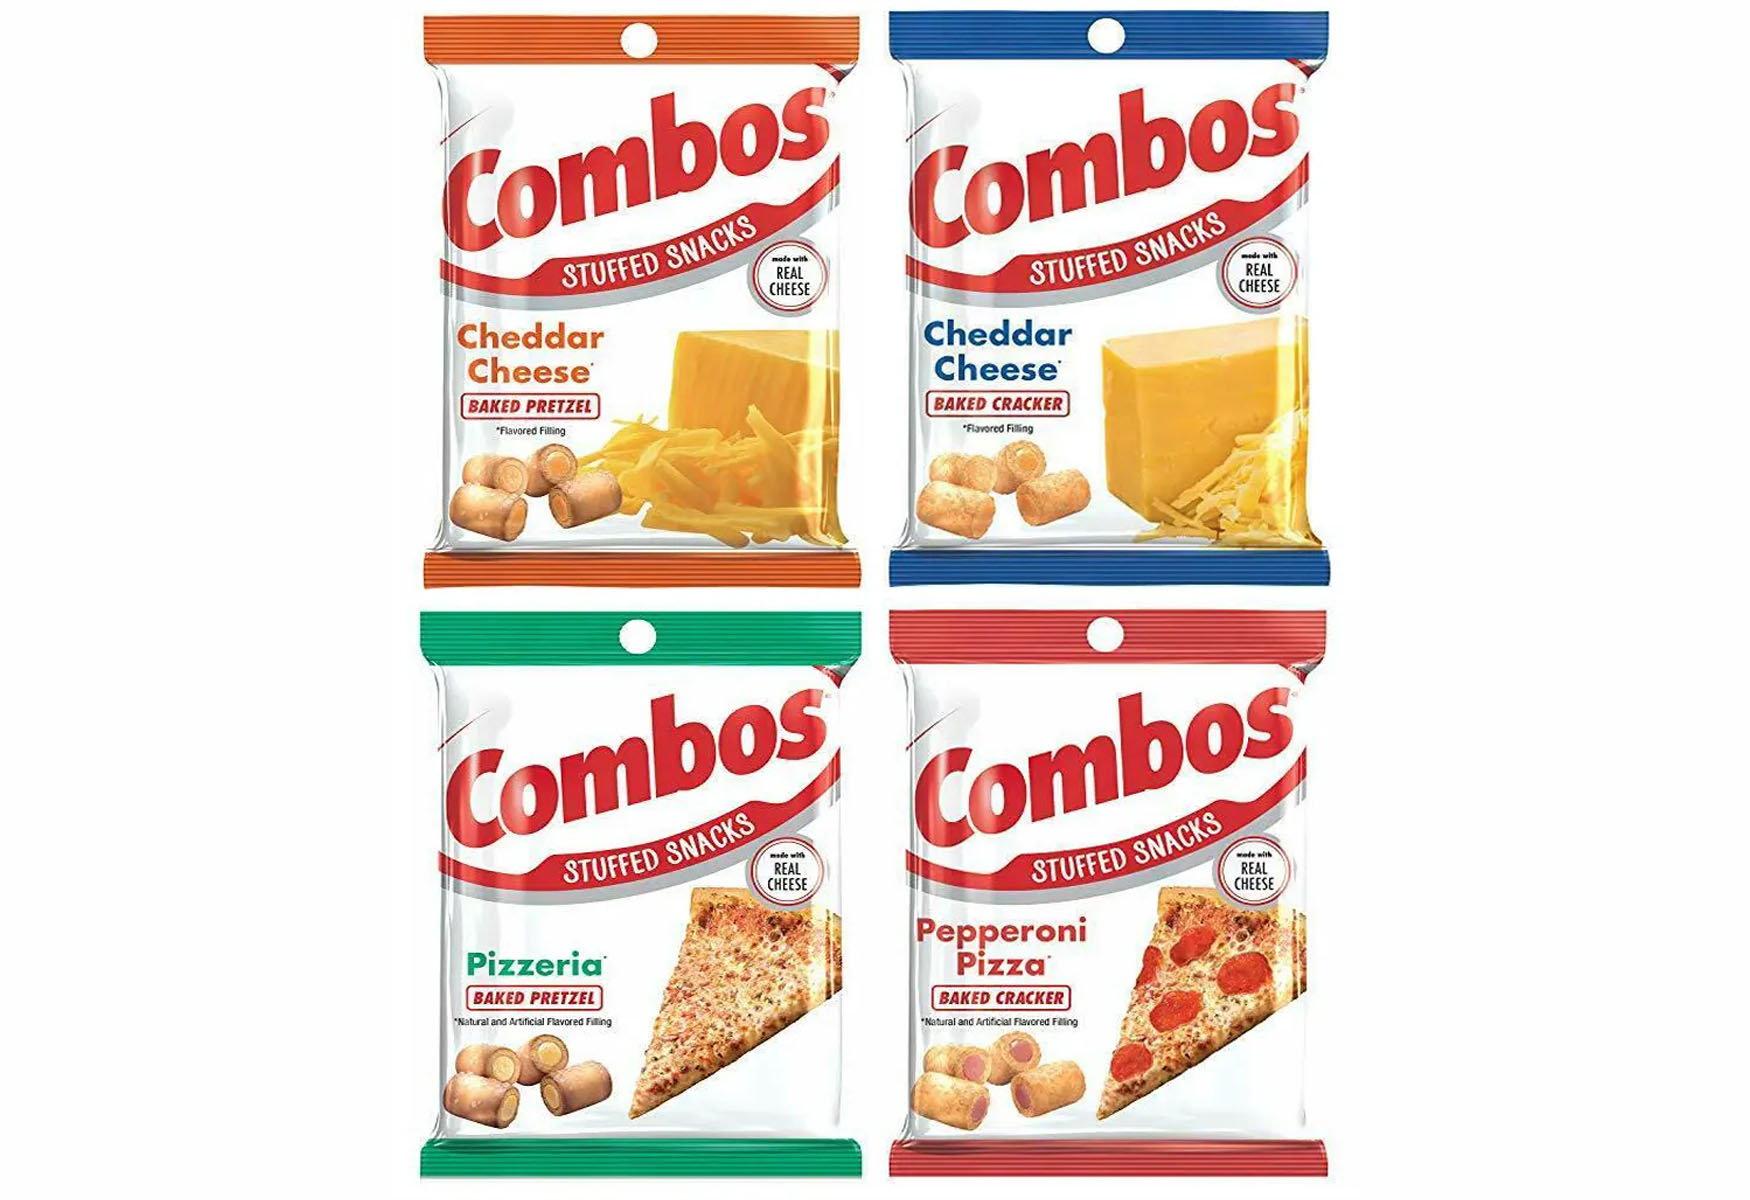 19-combos-nutrition-facts